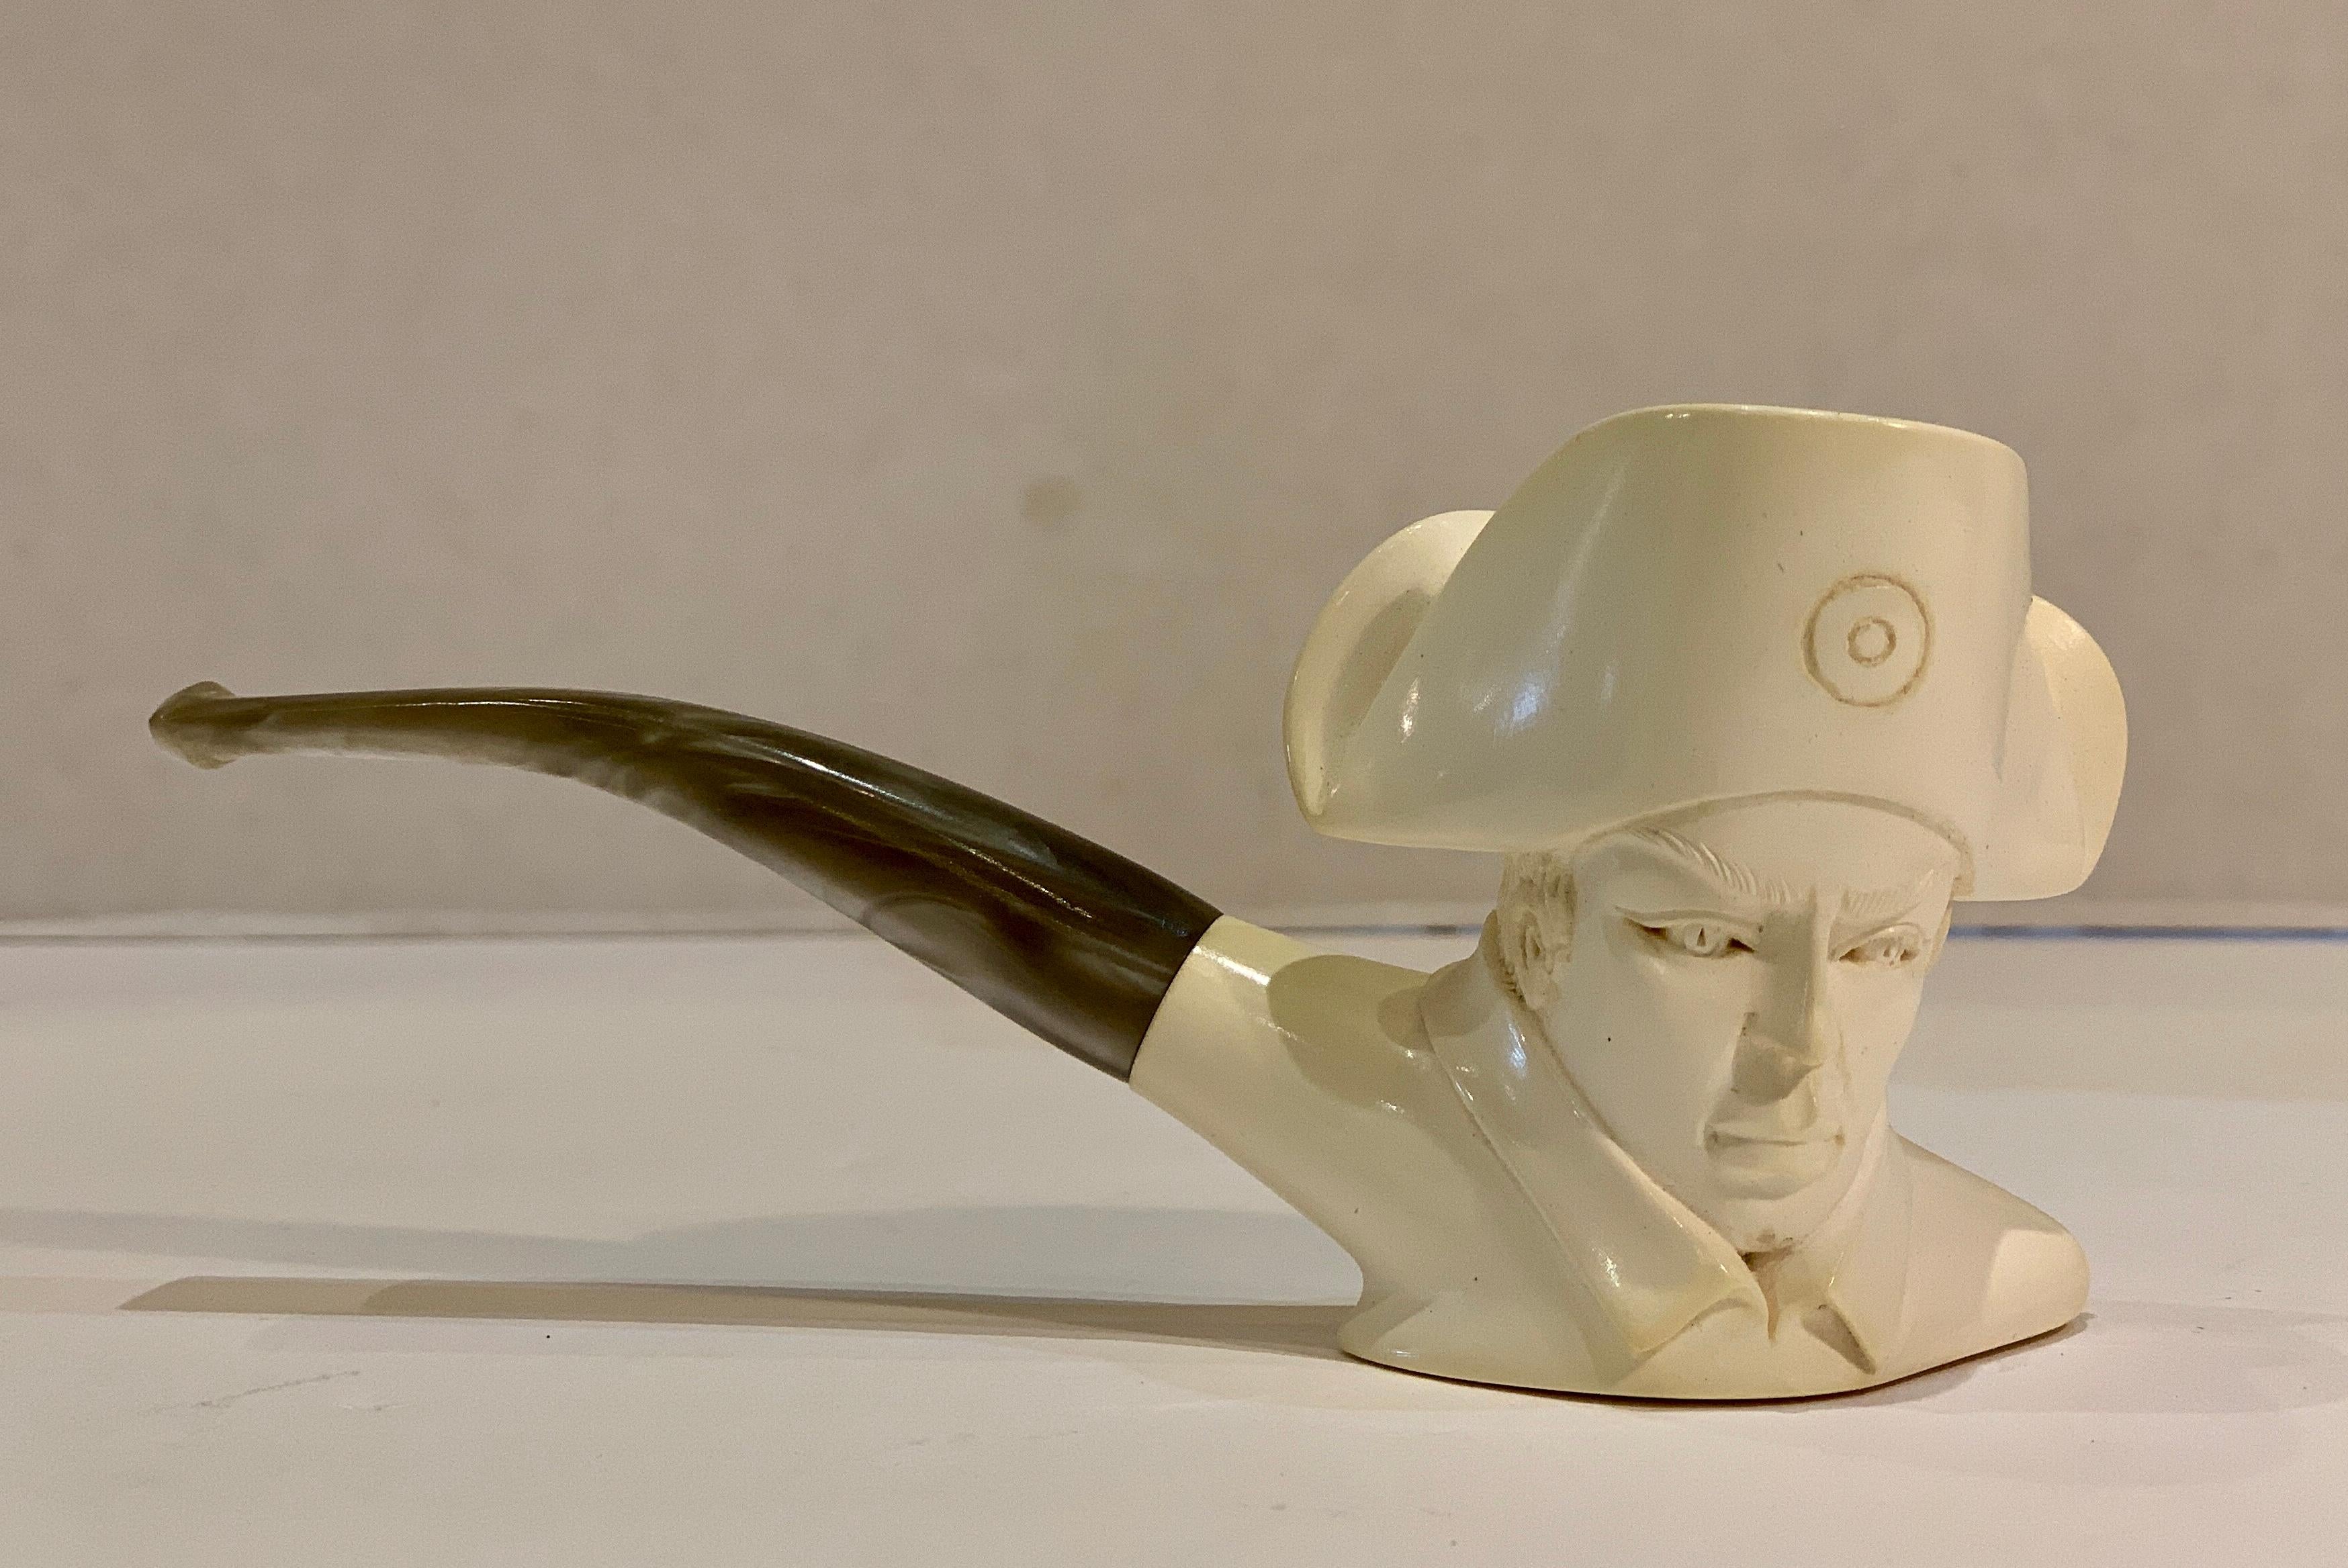 Outstanding, limited edition, hand carved, estate European Turkish meerschaum pipe is in unused, pristine condition and is a rare and very fine smoking collectable for a pipe aficionado. Pipe depicts the noble head of Napoleon on a pearlized stem,